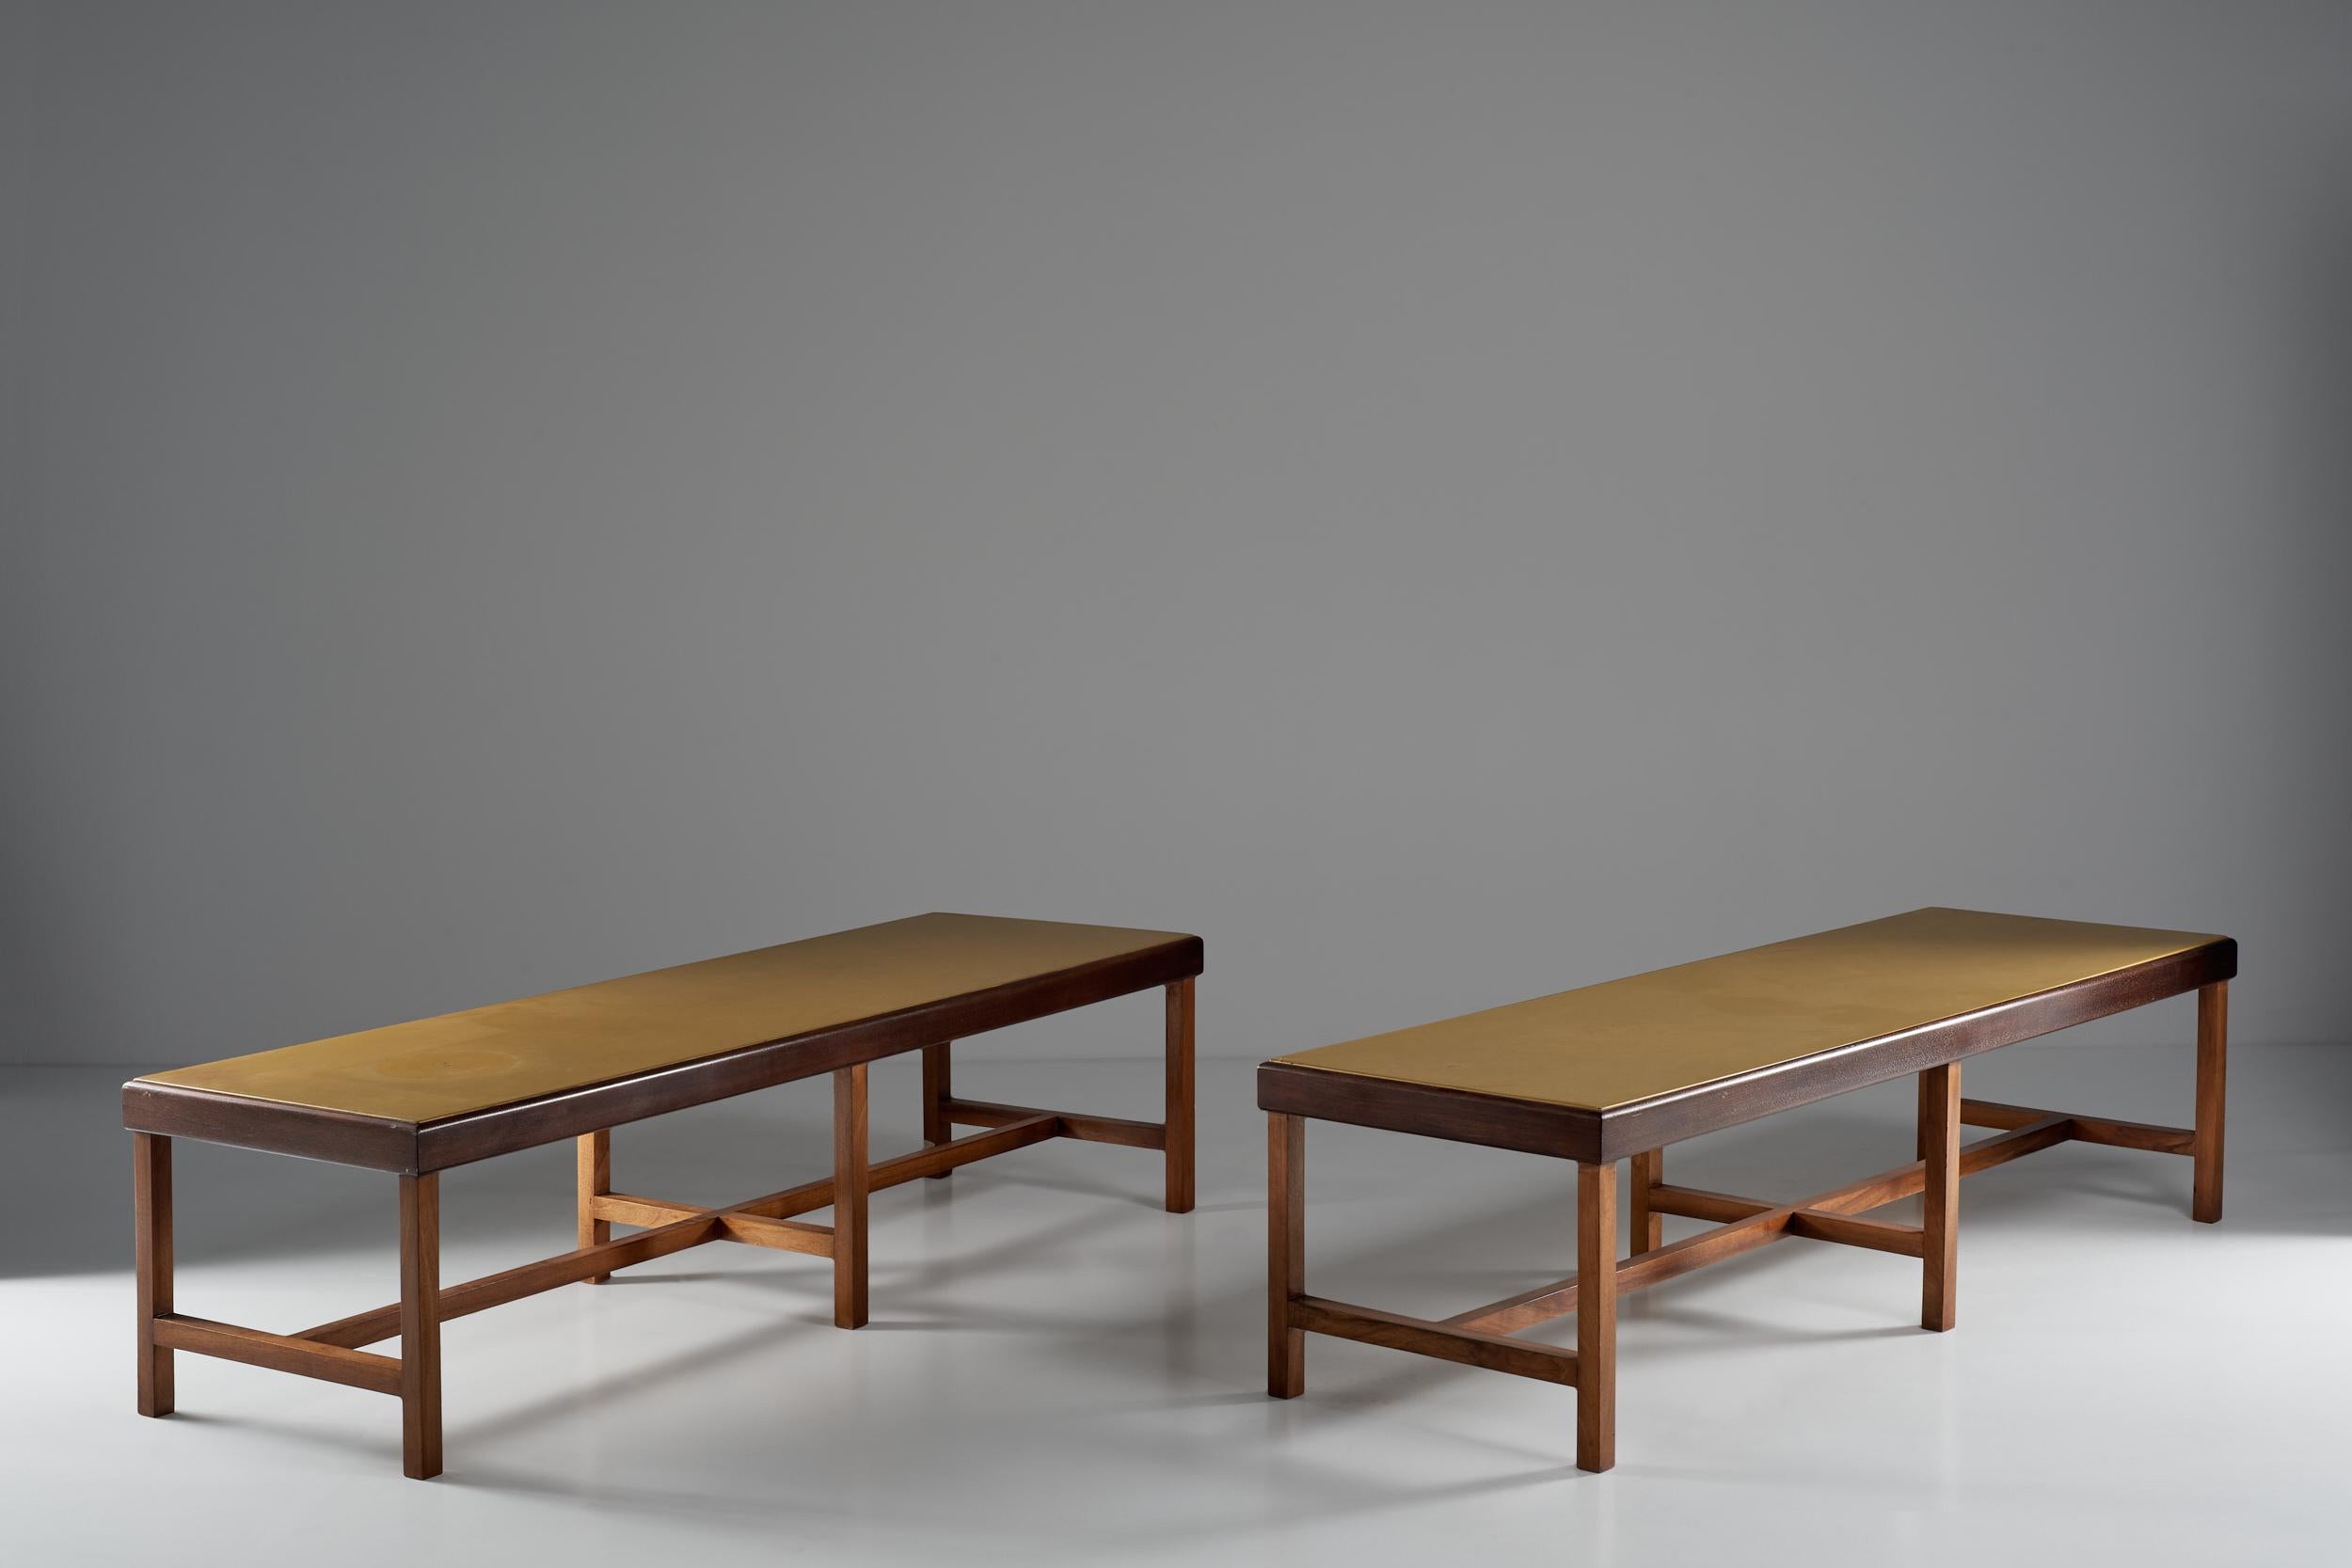 Two wooden benches or low tables and skai coverings. Corrado Corradi Dell'acqua thinks of a shape that can be traced back to the bench but which can nevertheless have a second utility as a low table. The pieces have been realized for a private